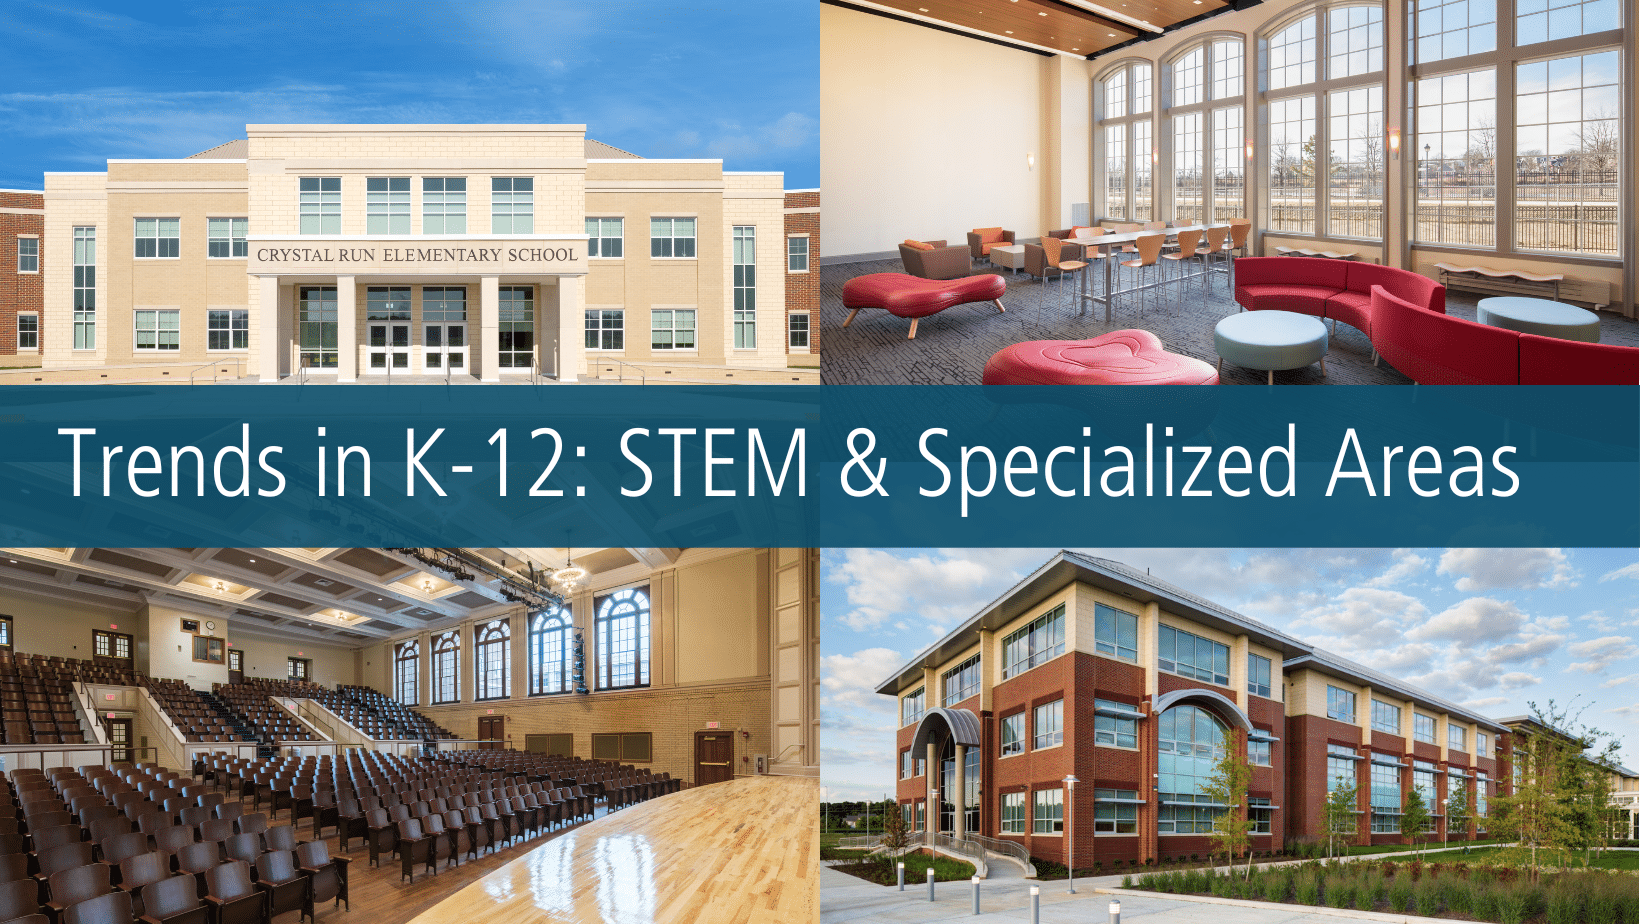 STEM & Specialized Learning Spaces in K-12 Education